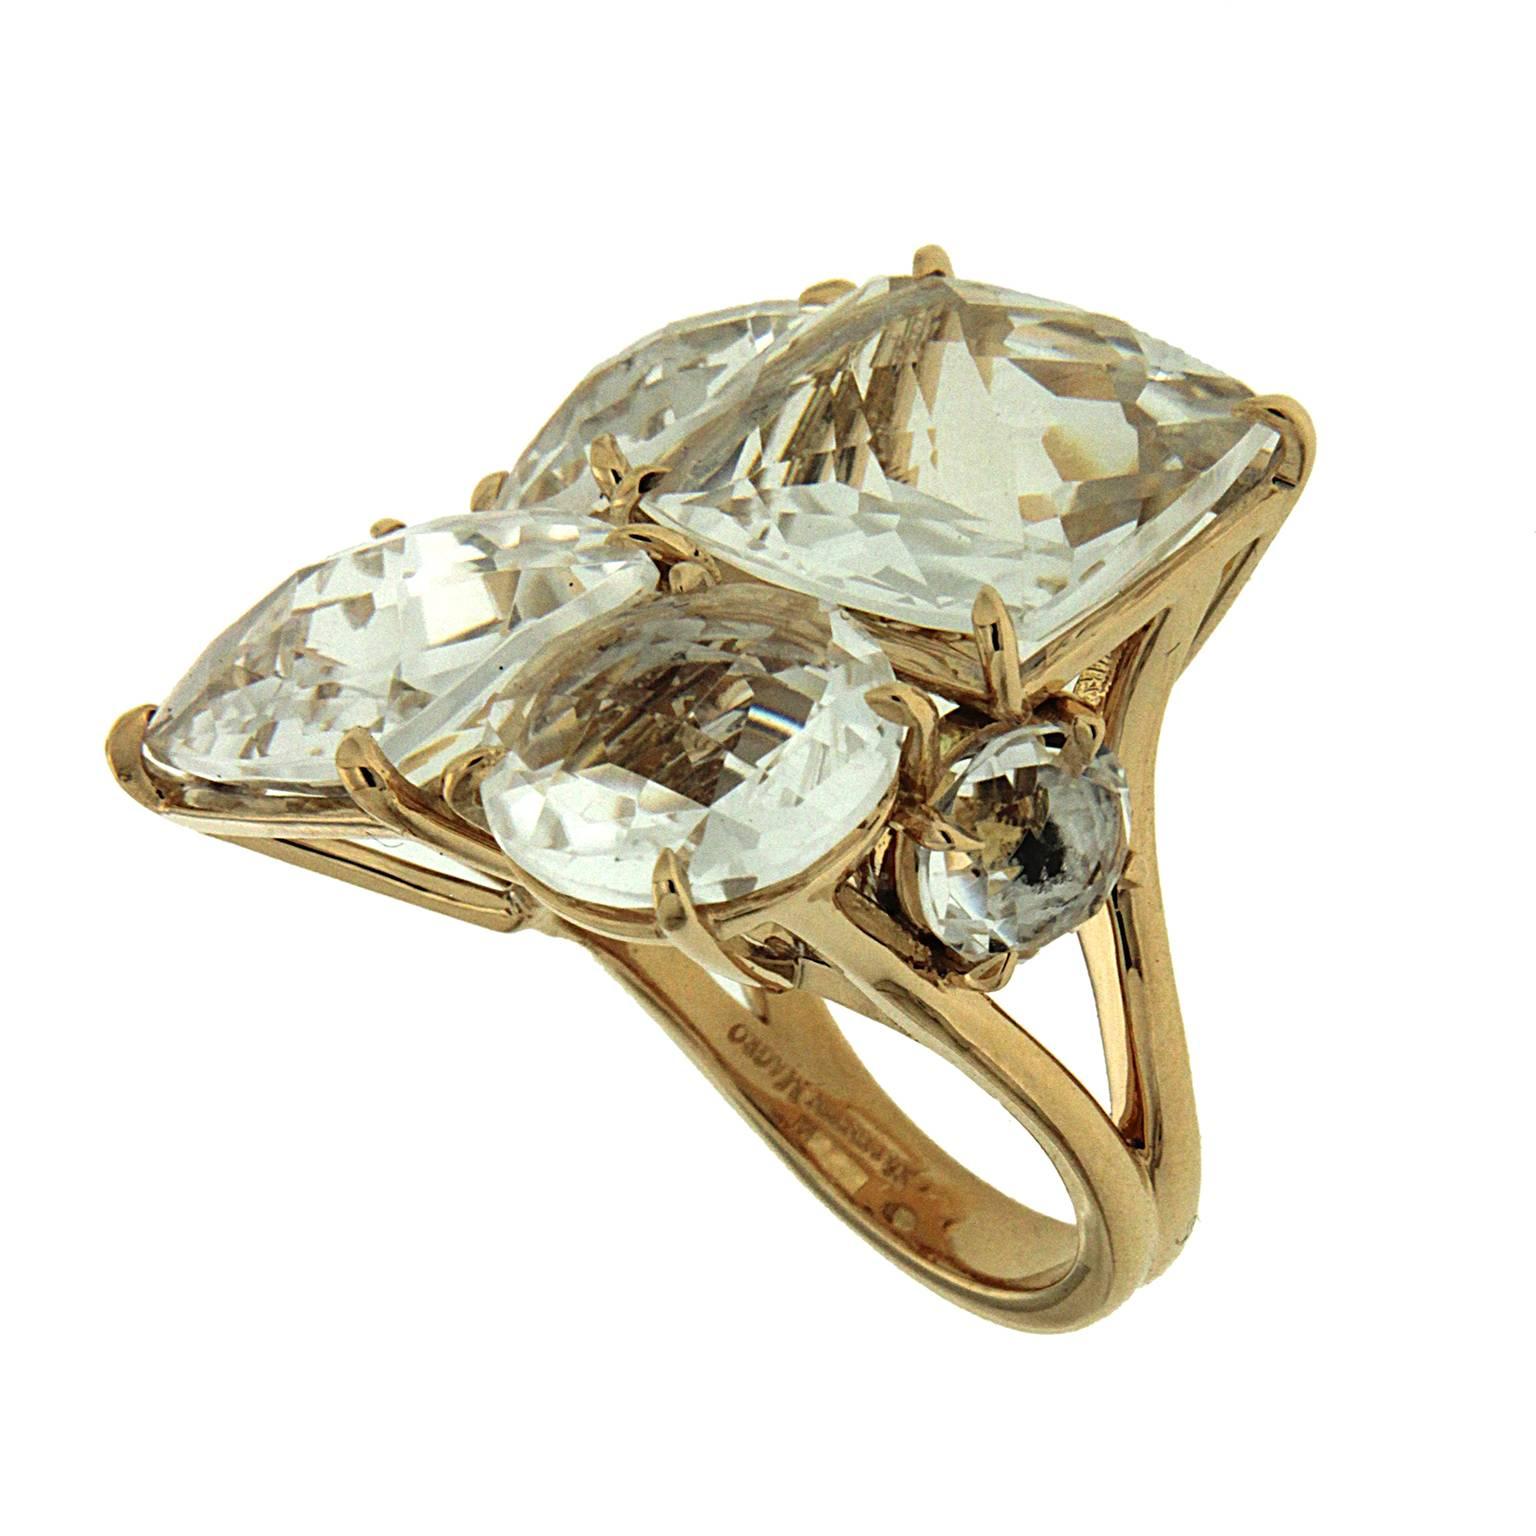 This ring features 6 special cut Cushion and Round Crystal stones with trellis settings in 18kt Yellow Gold. Total stone weight is about 29.45ct